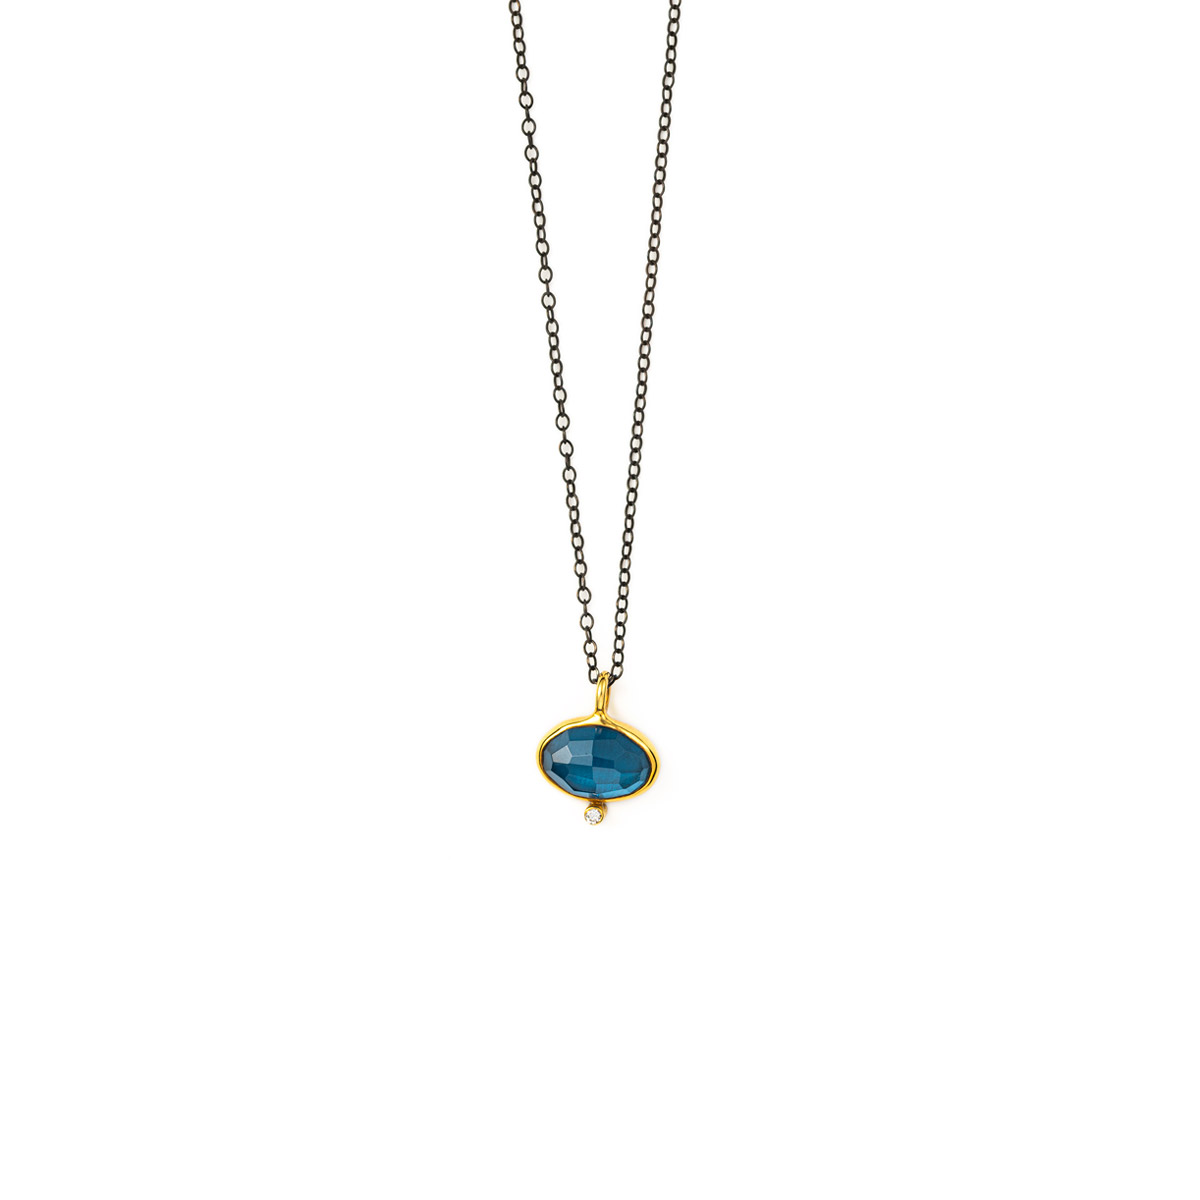 Blue Topaz Brilliant Necklace - 18K Gold and Sterling Silver